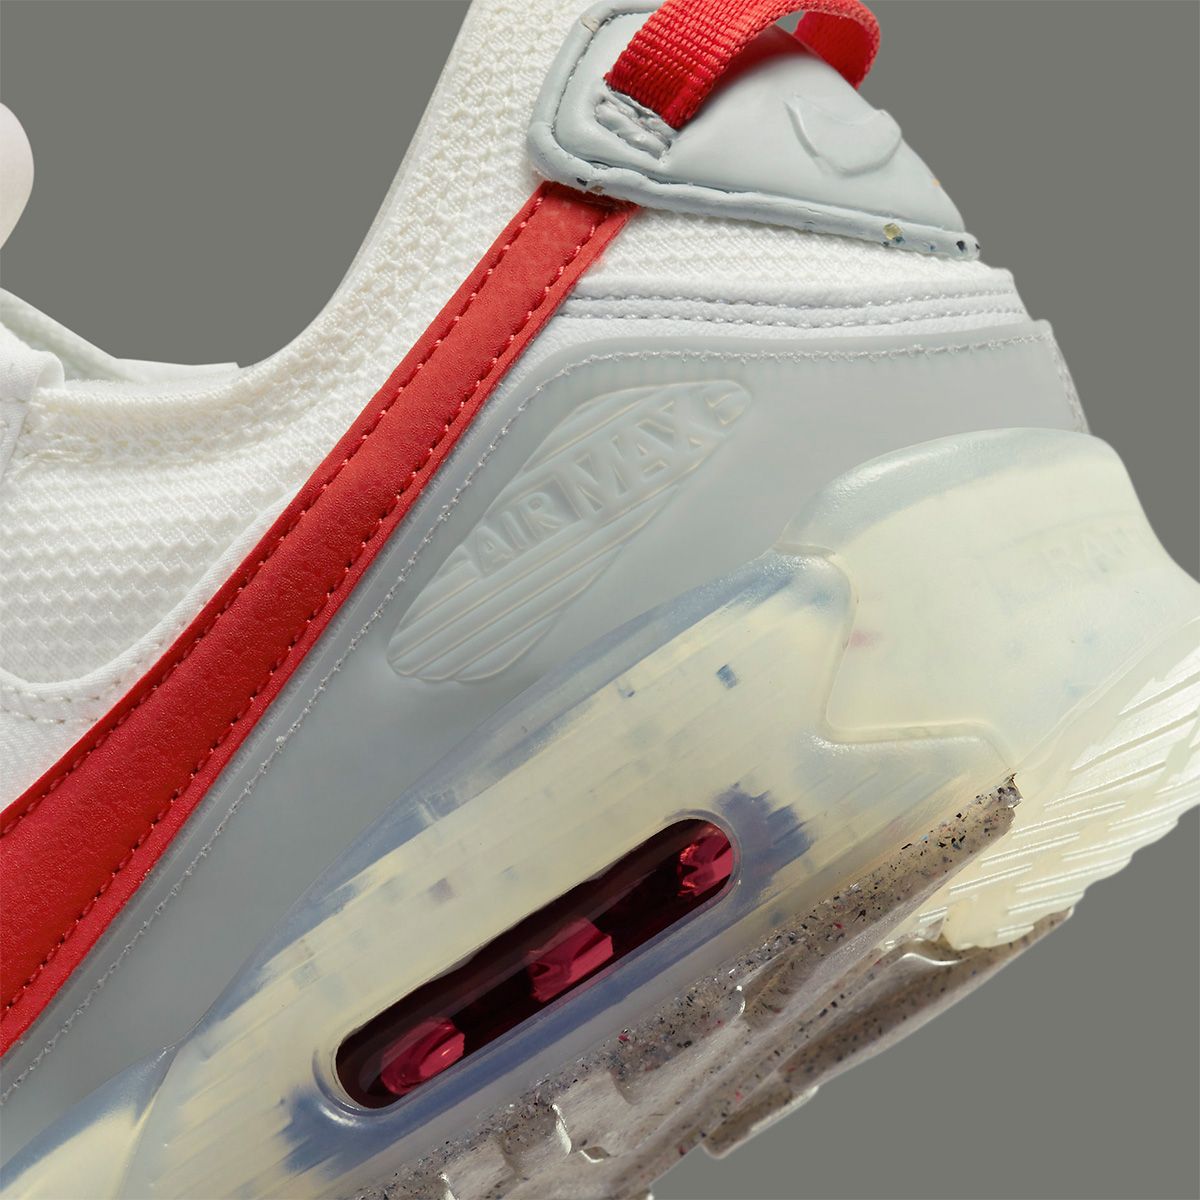 First Looks // Nike Air Max 90 Terrascape “Gym Red” | LaptrinhX / News